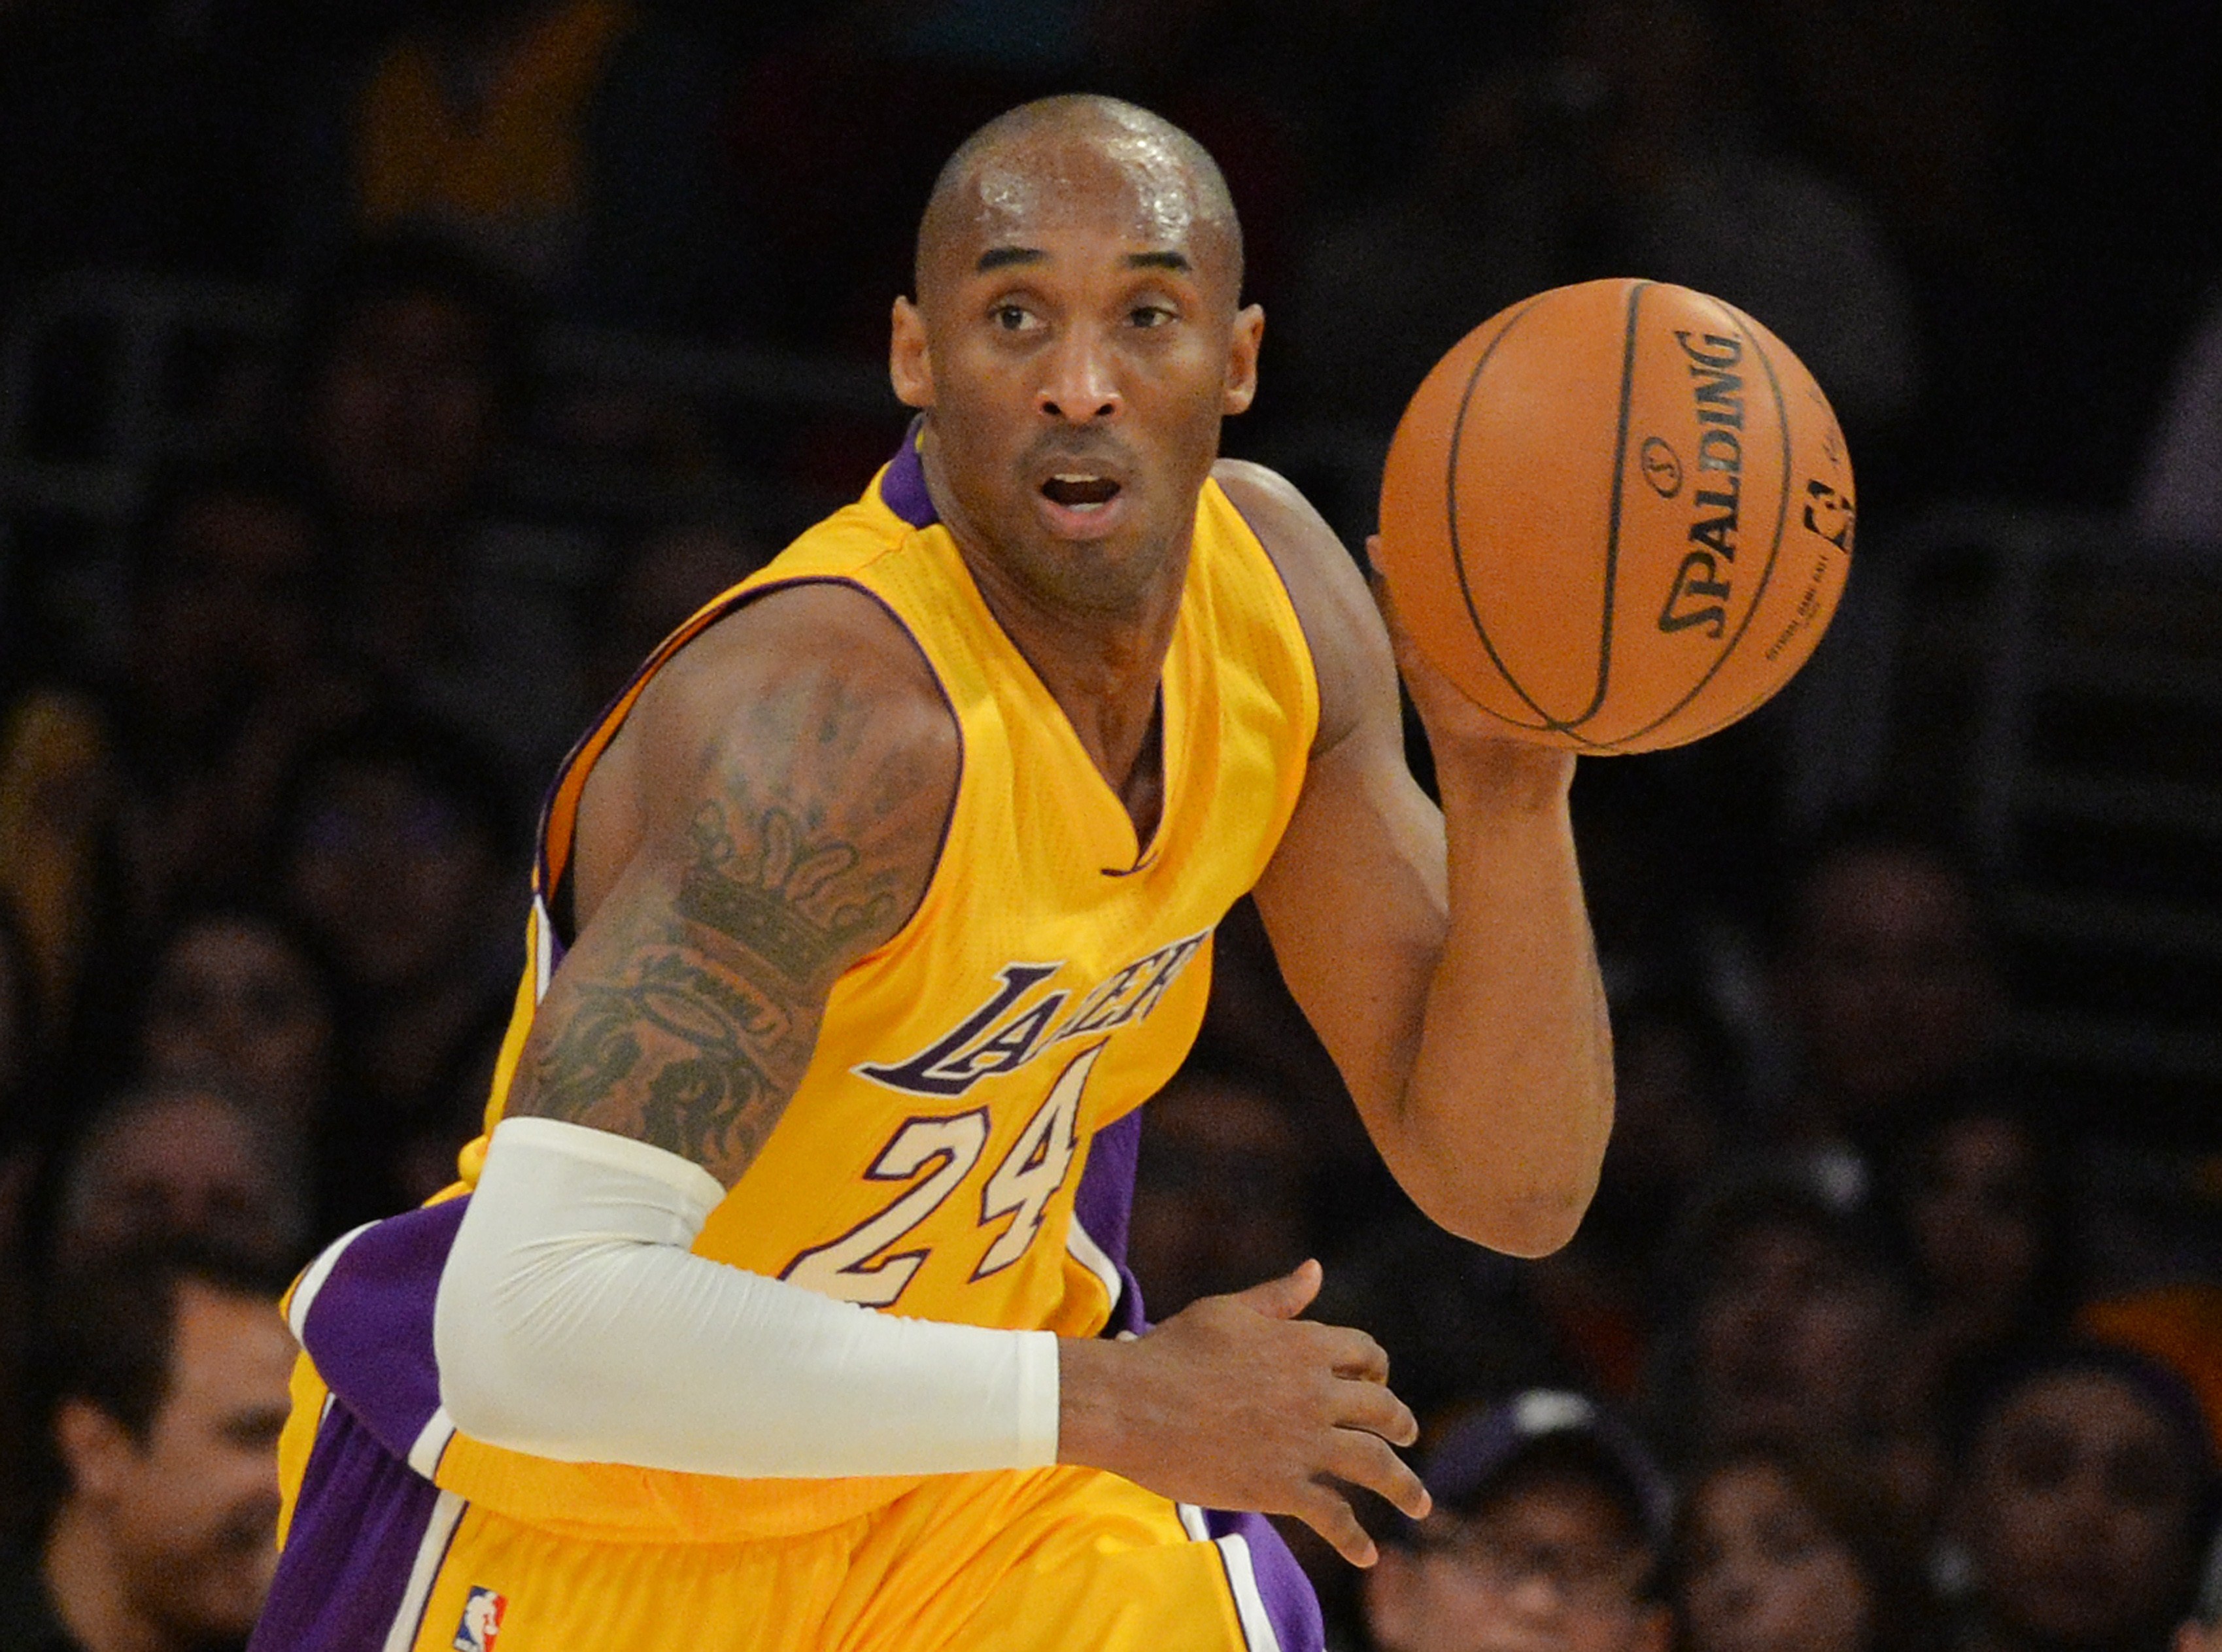 Which player did Kobe Bryant face off against in his final NBA All-Star Game?